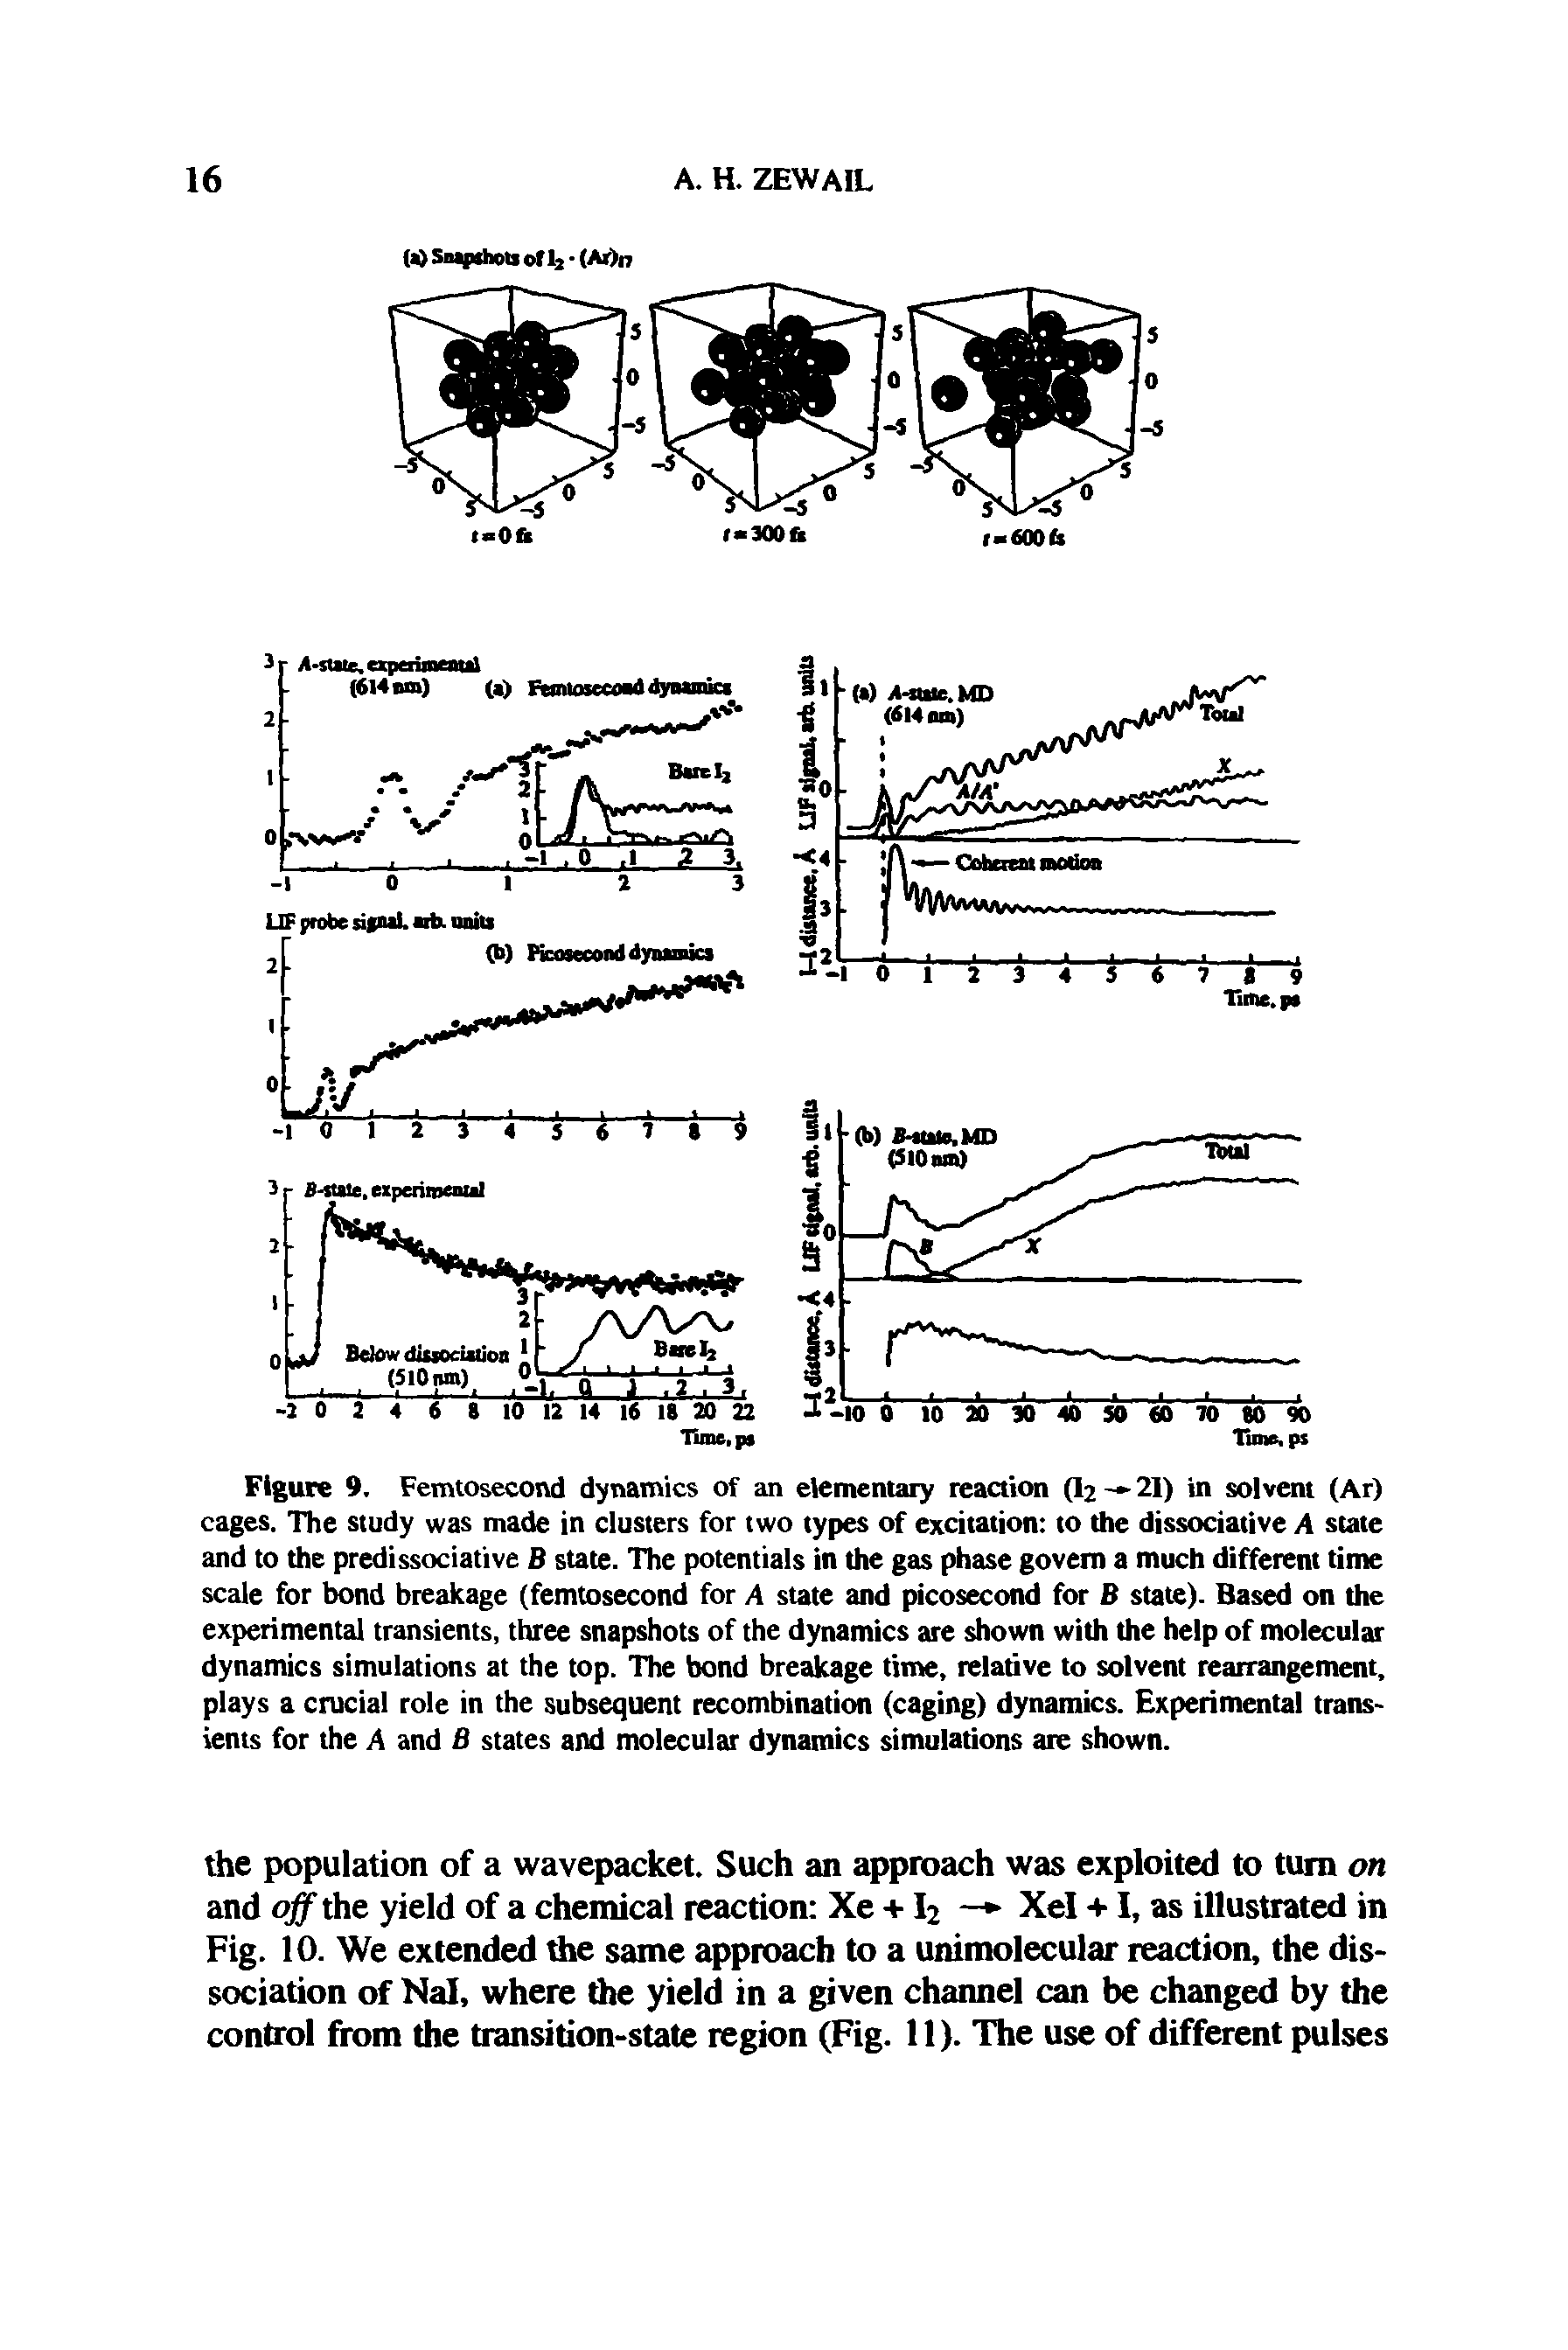 Figure 9. Femtosecond dynamics of an elementary reaction (I2 — 21) in solvent (Ar) cages. The study was made in clusters for two types of excitation to the dissociative A state and to the predissociative B state. The potentials in the gas phase govern a much different time scale for bond breakage (femtosecond for A state and picosecond for B state). Based on the experimental transients, three snapshots of the dynamics are shown with the help of molecular dynamics simulations at the top. The bond breakage time, relative to solvent rearrangement, plays a crucial role in the subsequent recombination (caging) dynamics. Experimental transients for the A and B states and molecular dynamics simulations are shown.